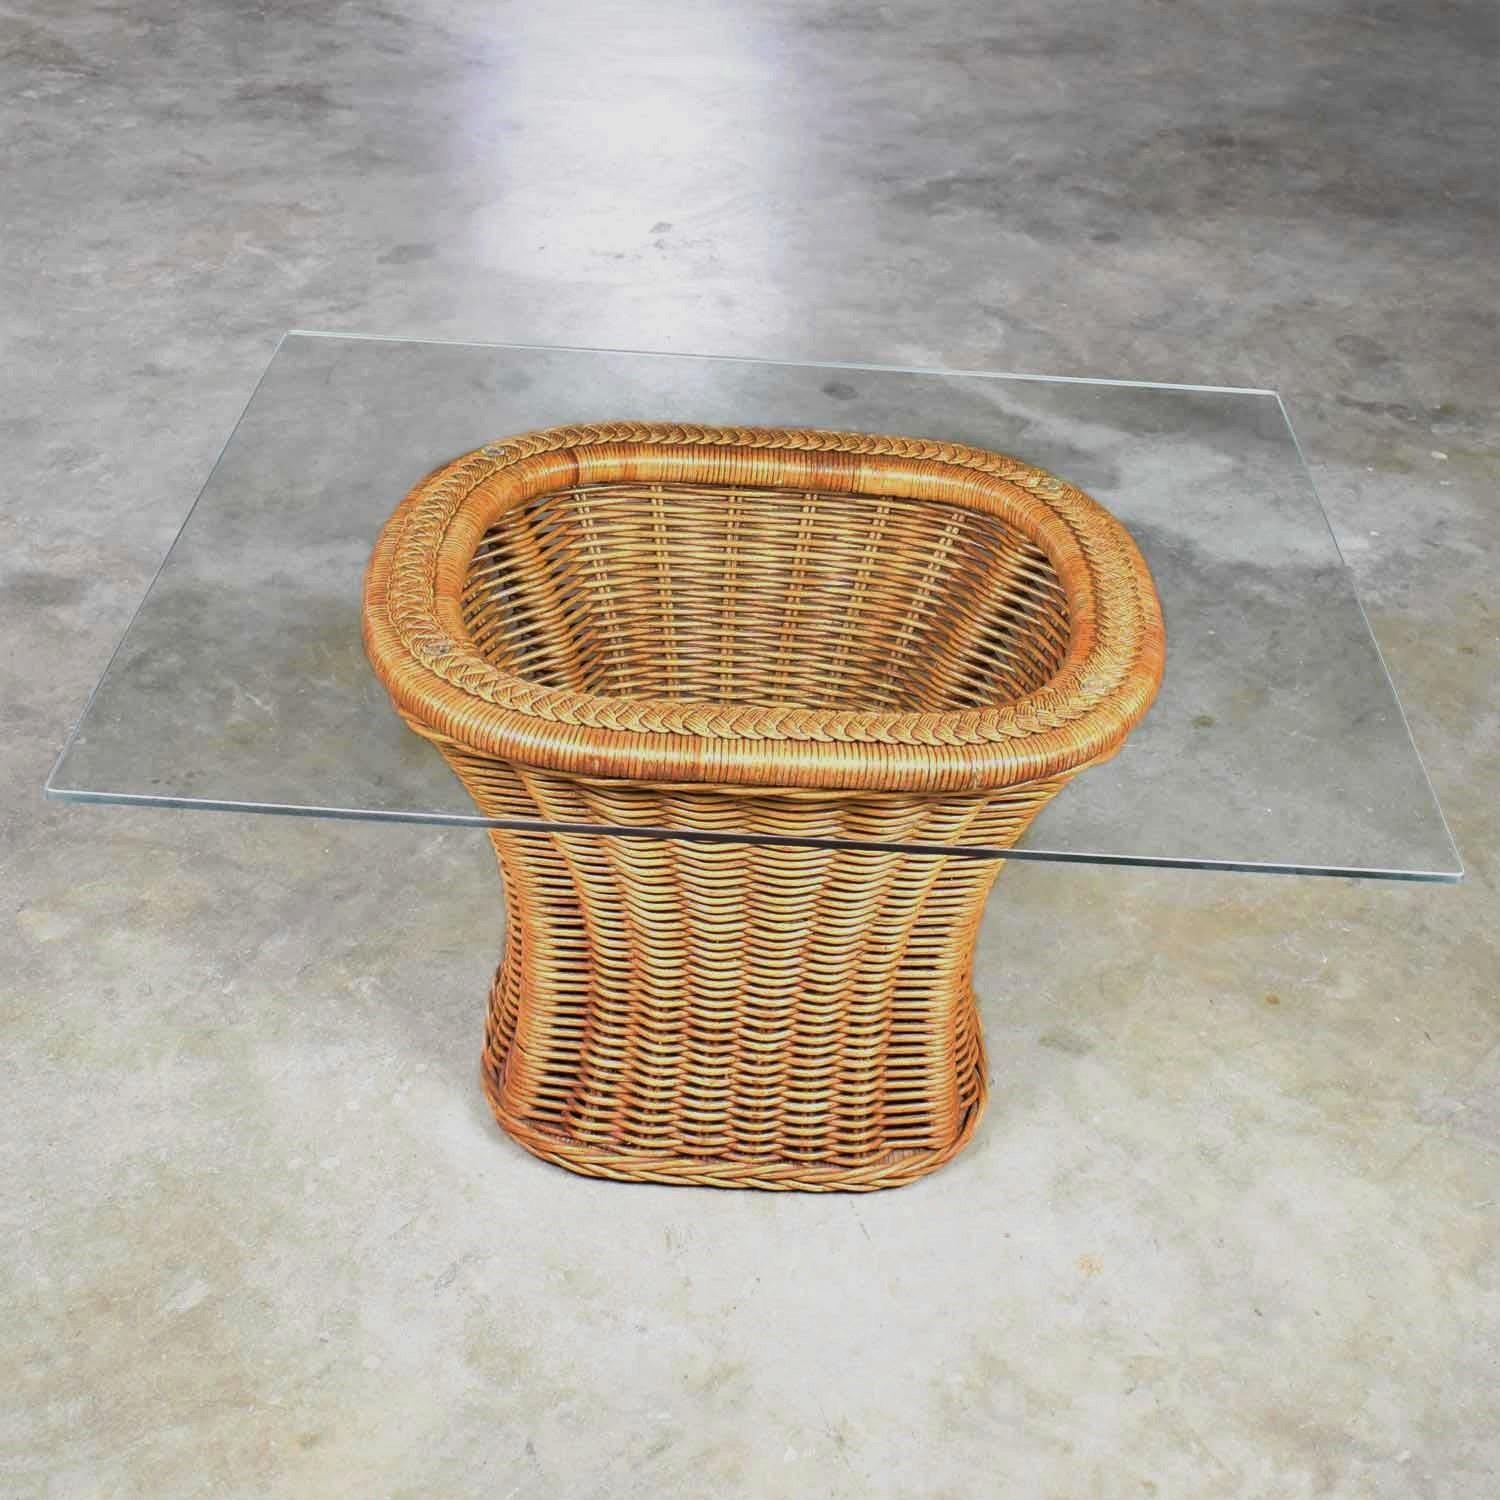 Organic Modern Woven Wicker Rattan Side or End Table with Rectangular Glass In Good Condition For Sale In Topeka, KS